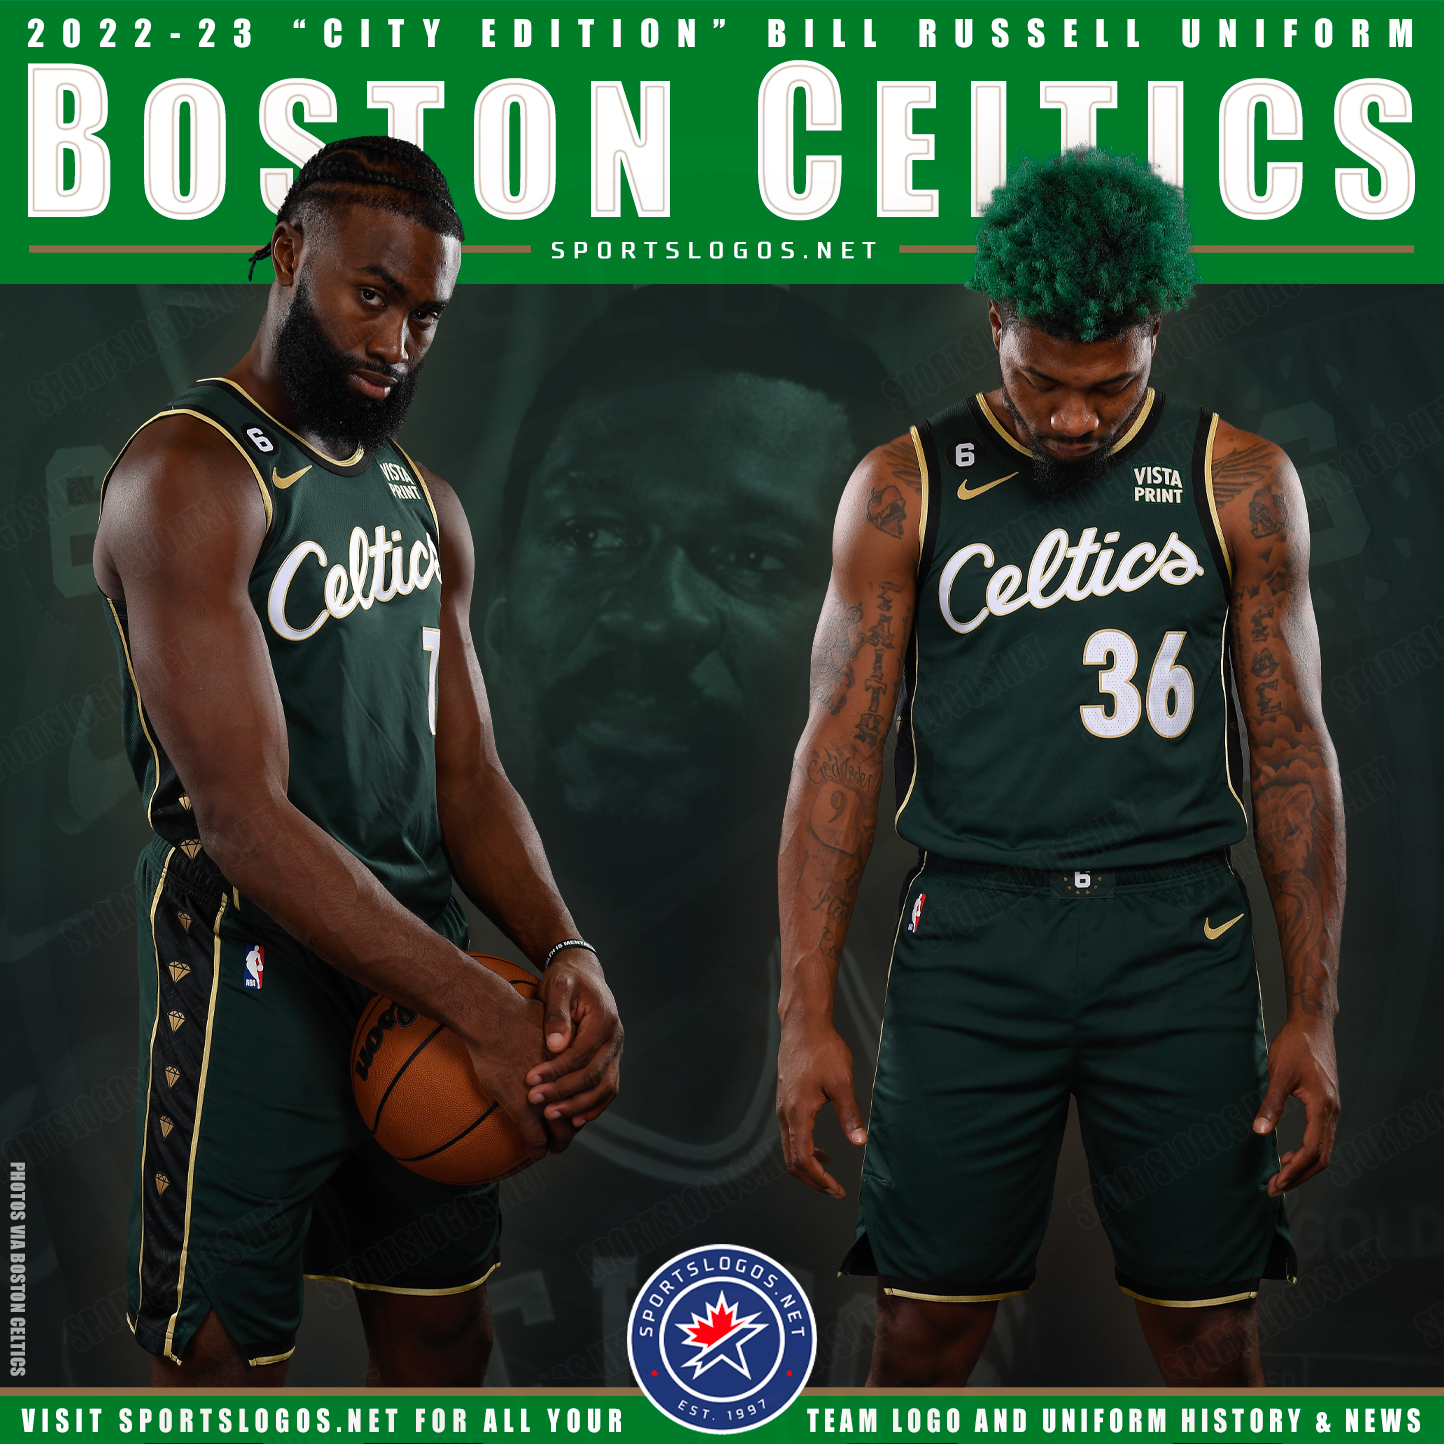 NBA Buzz - FIRST LOOK: Boston Celtics will begin the 2022-23 NBA season in  jerseys honoring Bill Russell. The new “City Edition” uniforms were  designed with Bill's involvement over a year ago